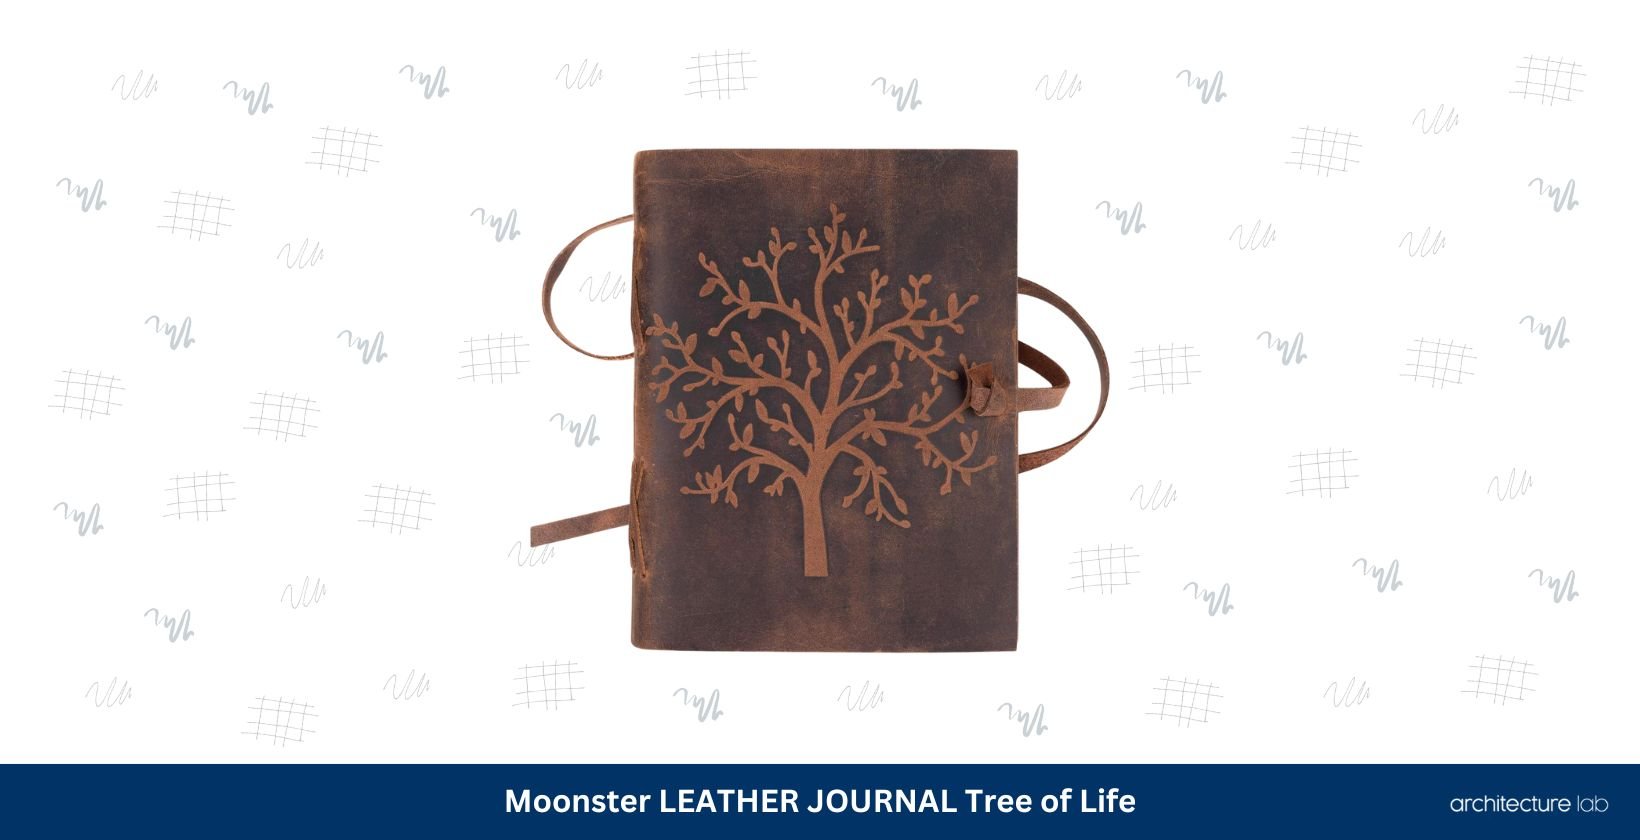 Moonster leather journal tree of life